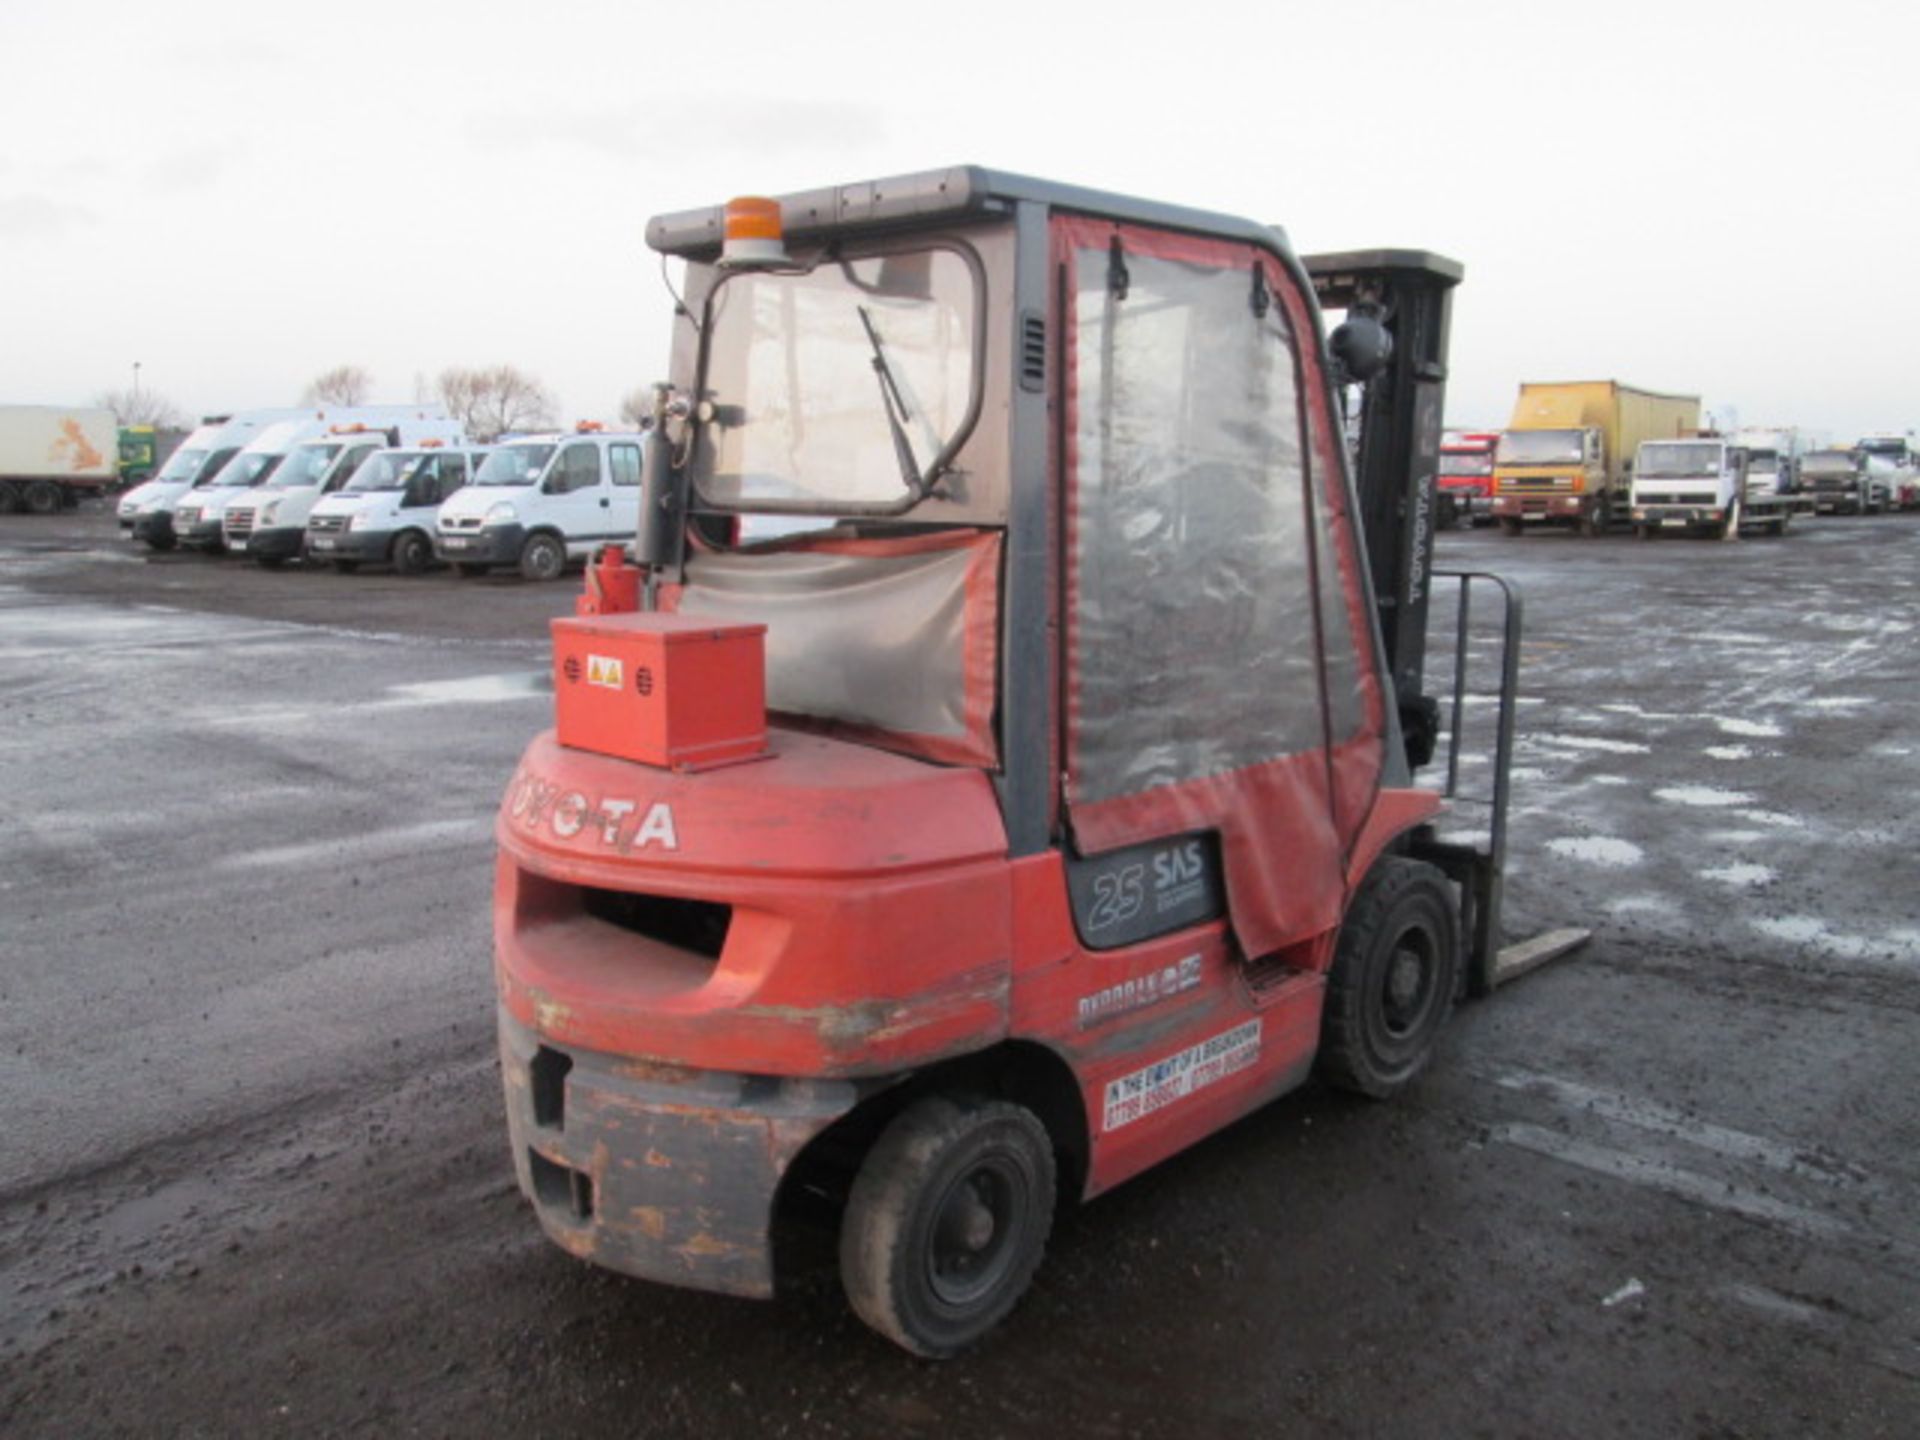 TOYOTA FDF25 Diesel - VIN: 607FDF25E16114 - Year: 2004 - N/A Hours - Triplex Forklift, **NON - Image 3 of 6